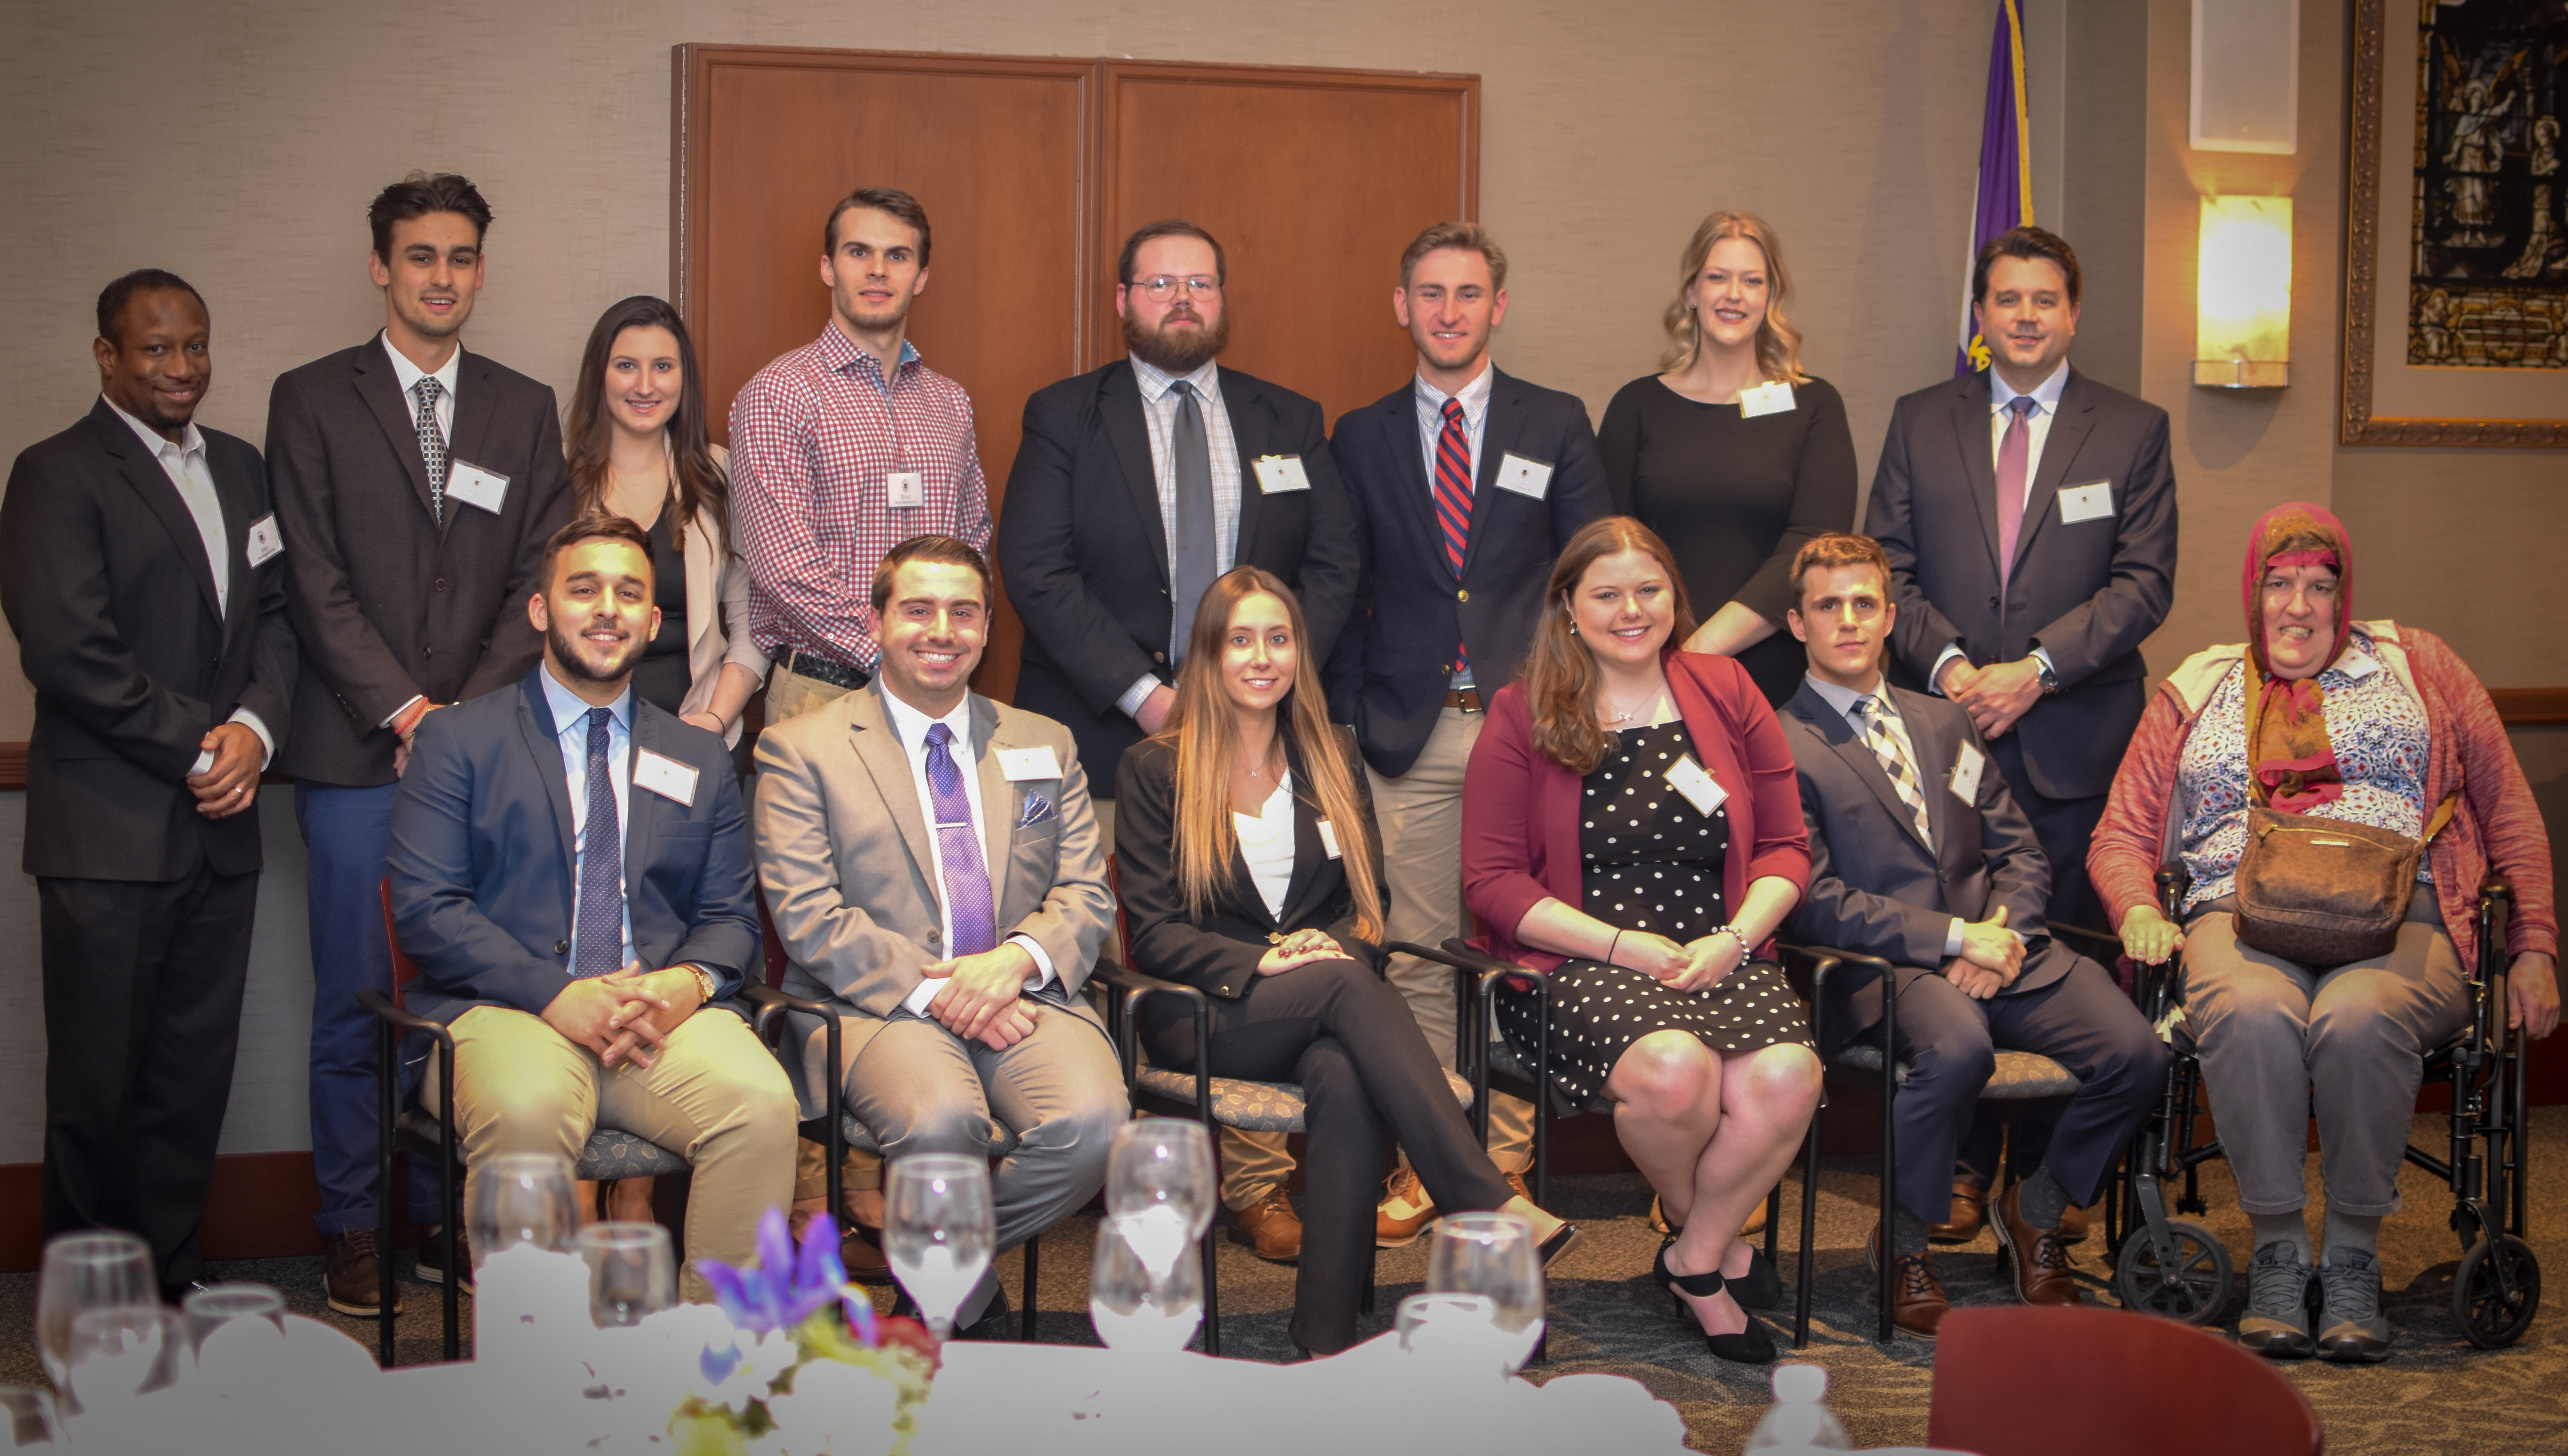 Members of the class of 2019 pose with members of the faculty at the Pre-law Advisory Program Banquet in 2019. 